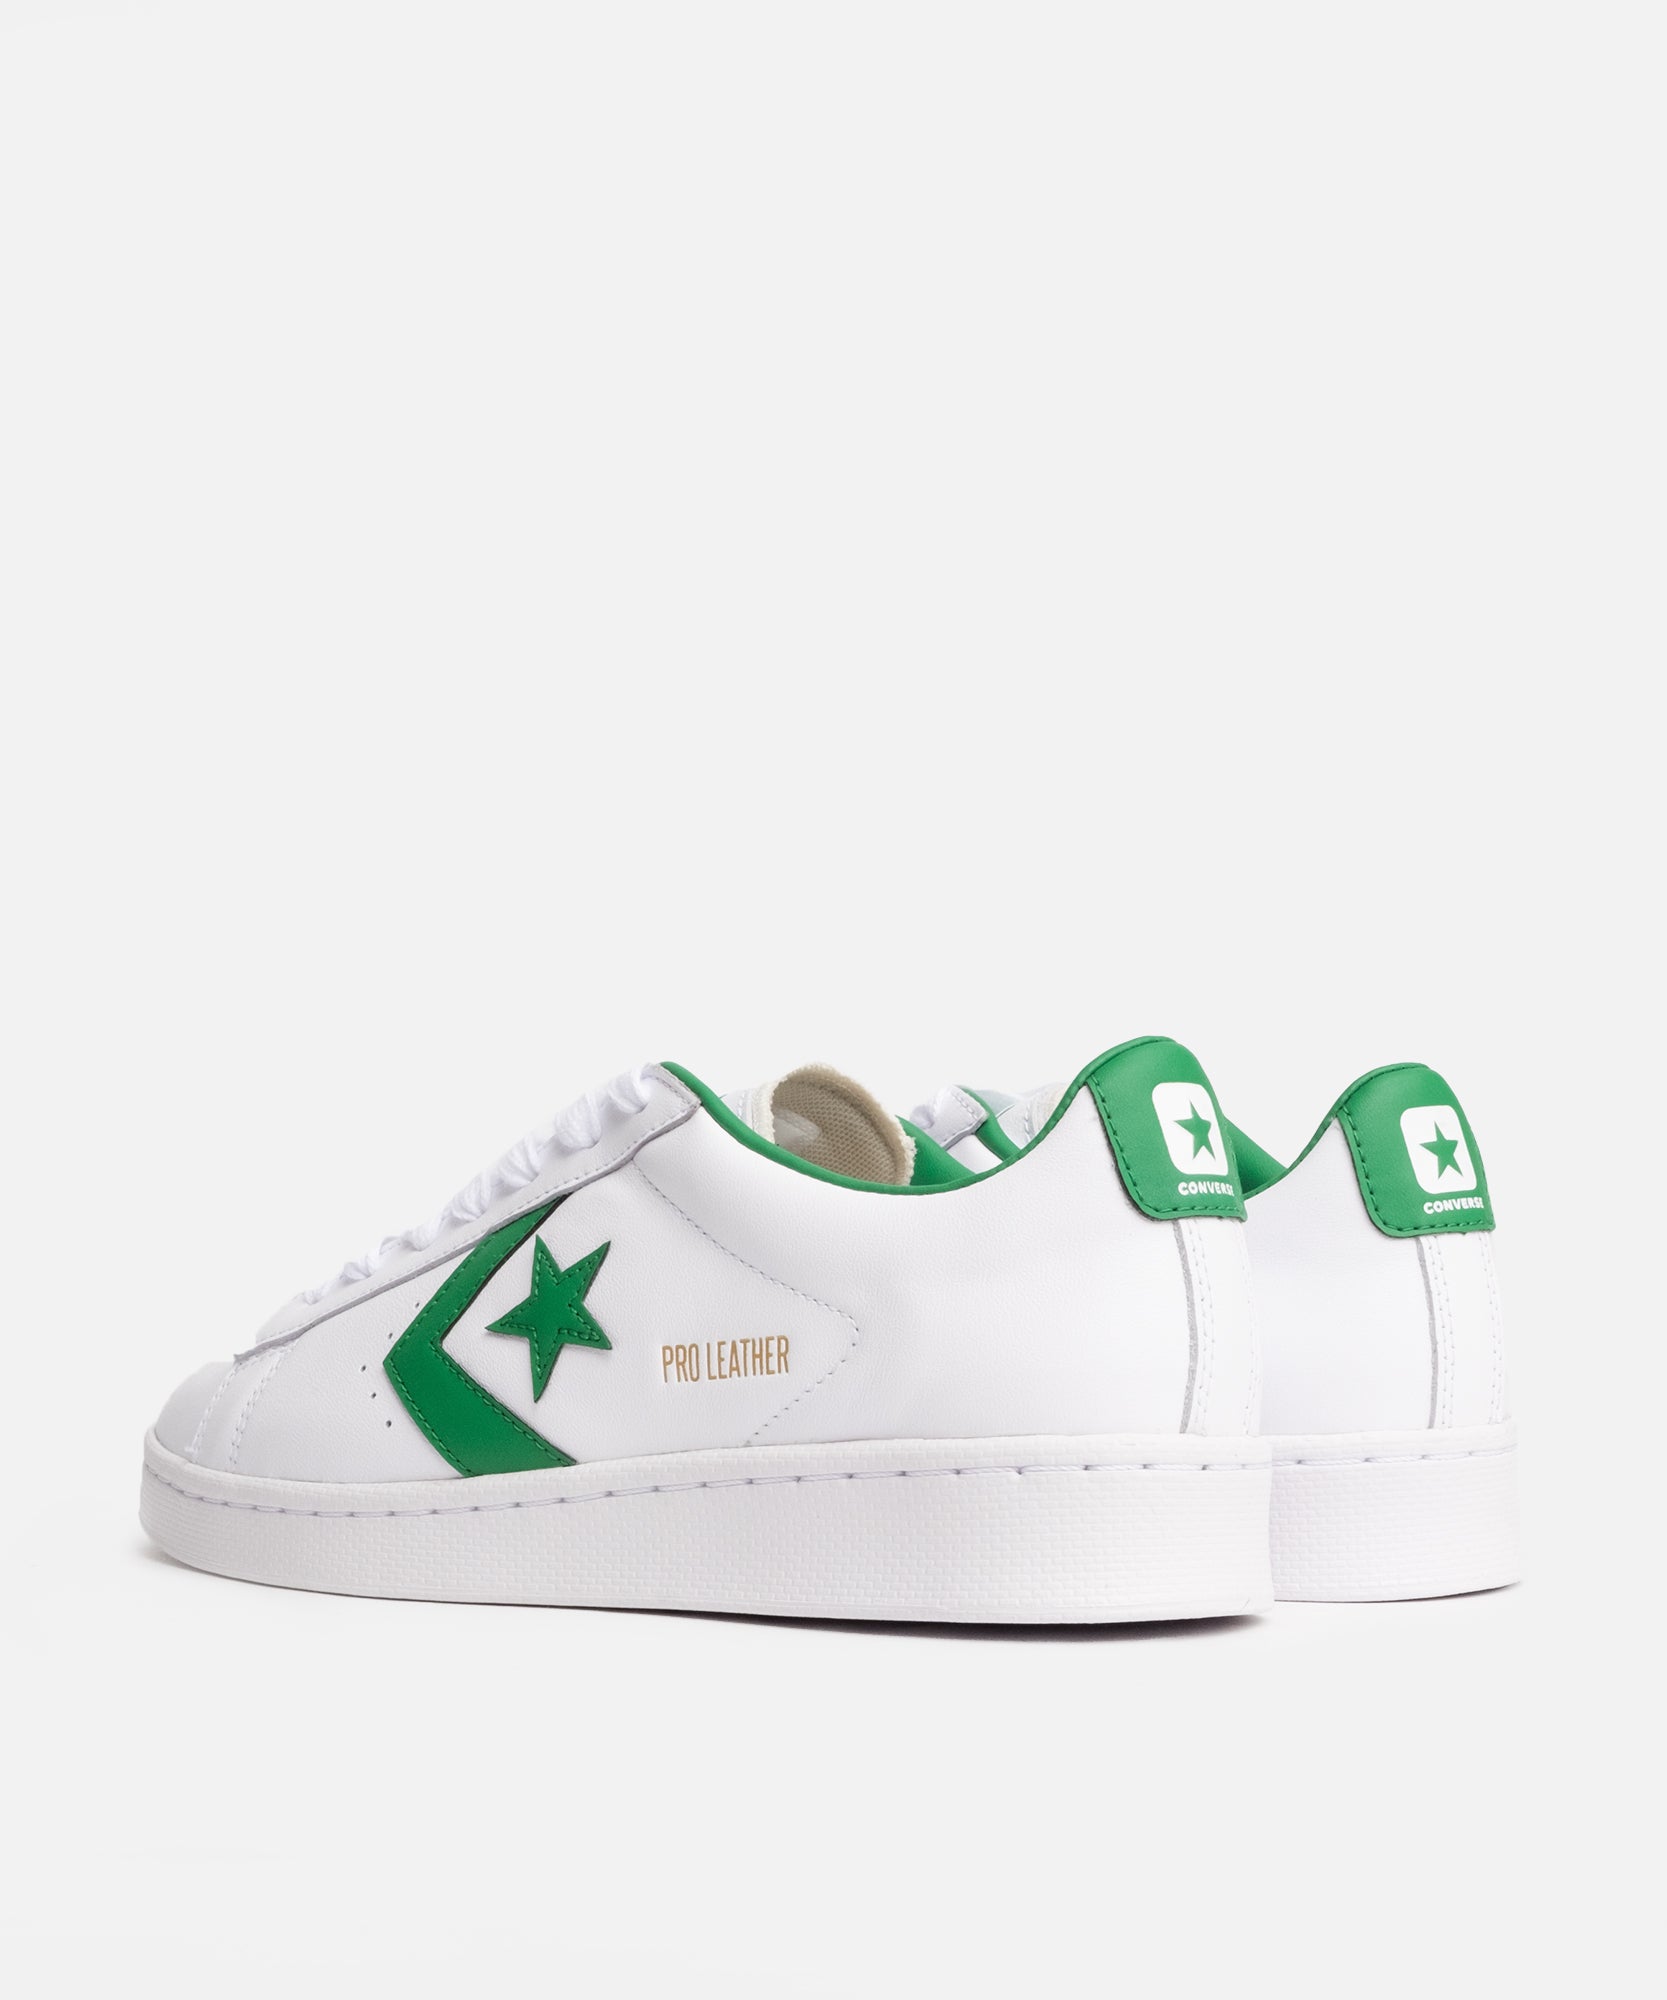 converse pro leather green